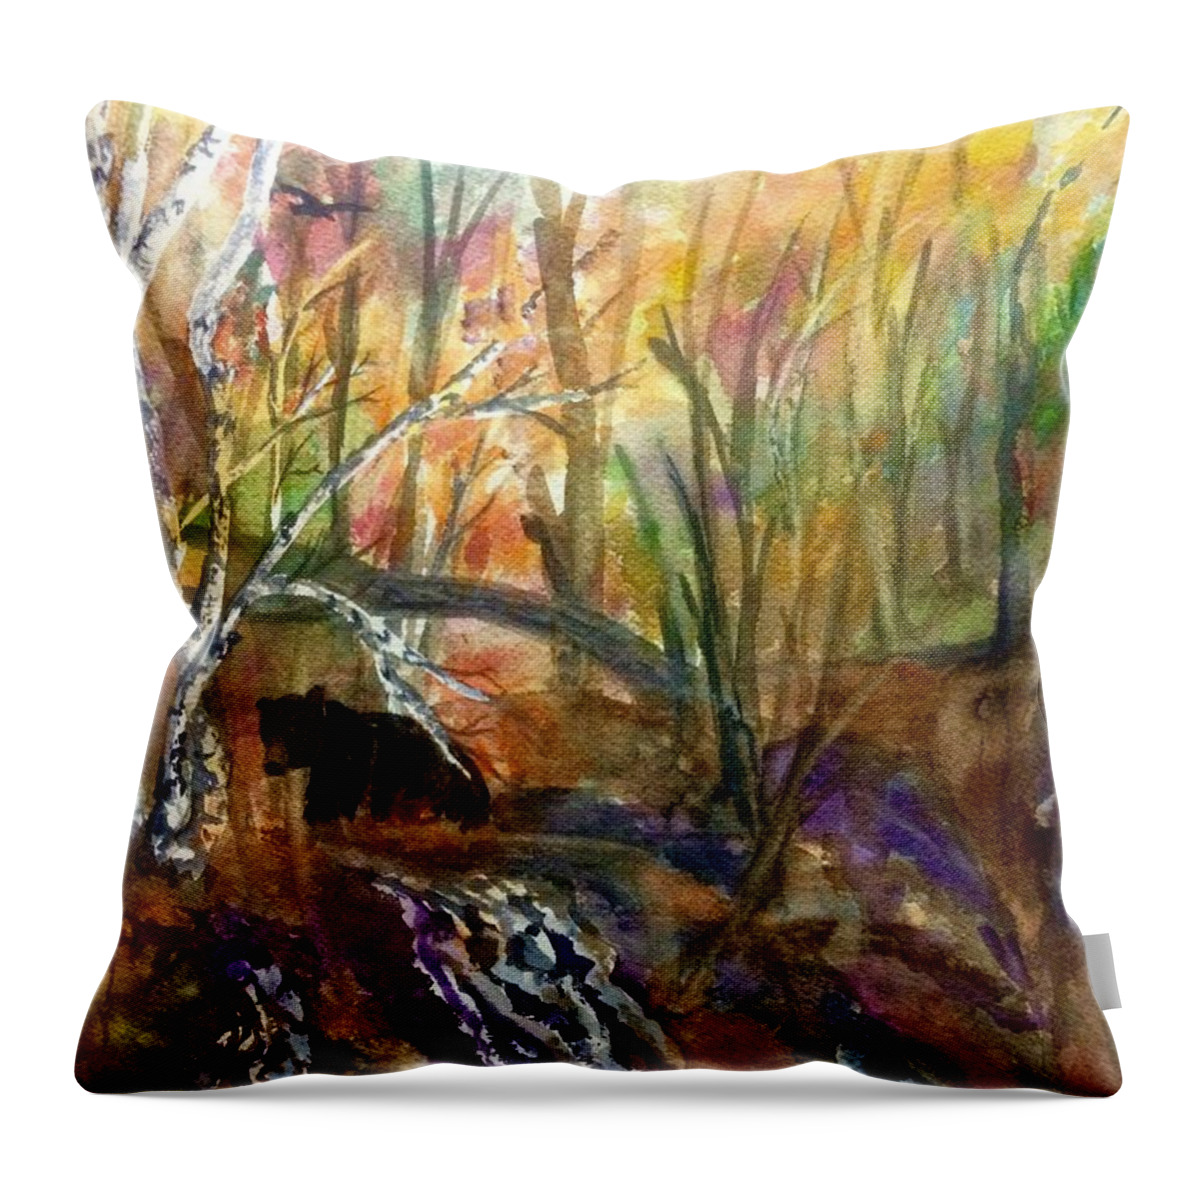 Black Bear Throw Pillow featuring the painting Black Bear in Autumn Woods by Ellen Levinson